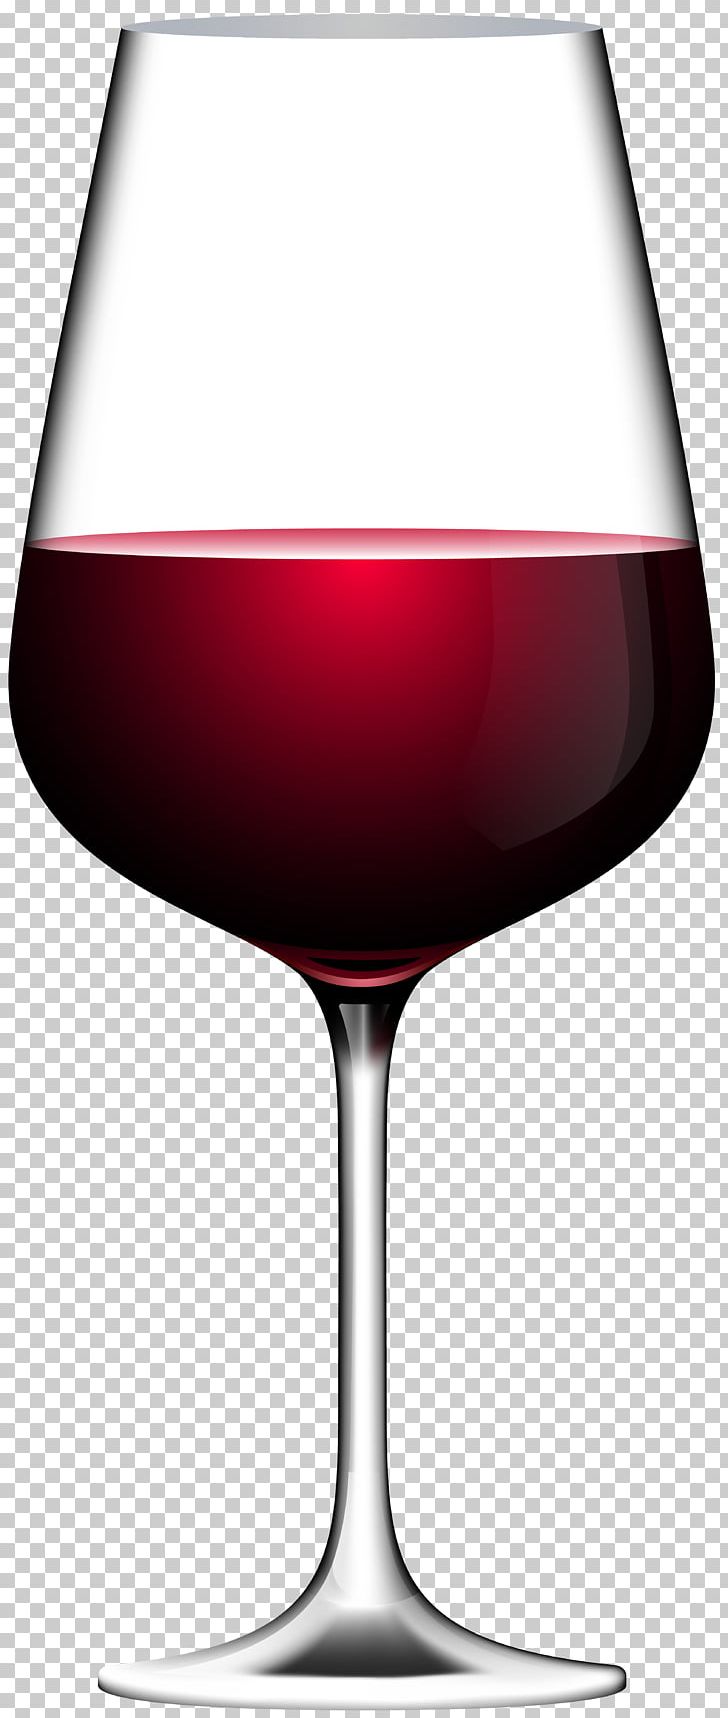 Red Wine Champagne Wine Glass PNG, Clipart, Alcoholic Drink.